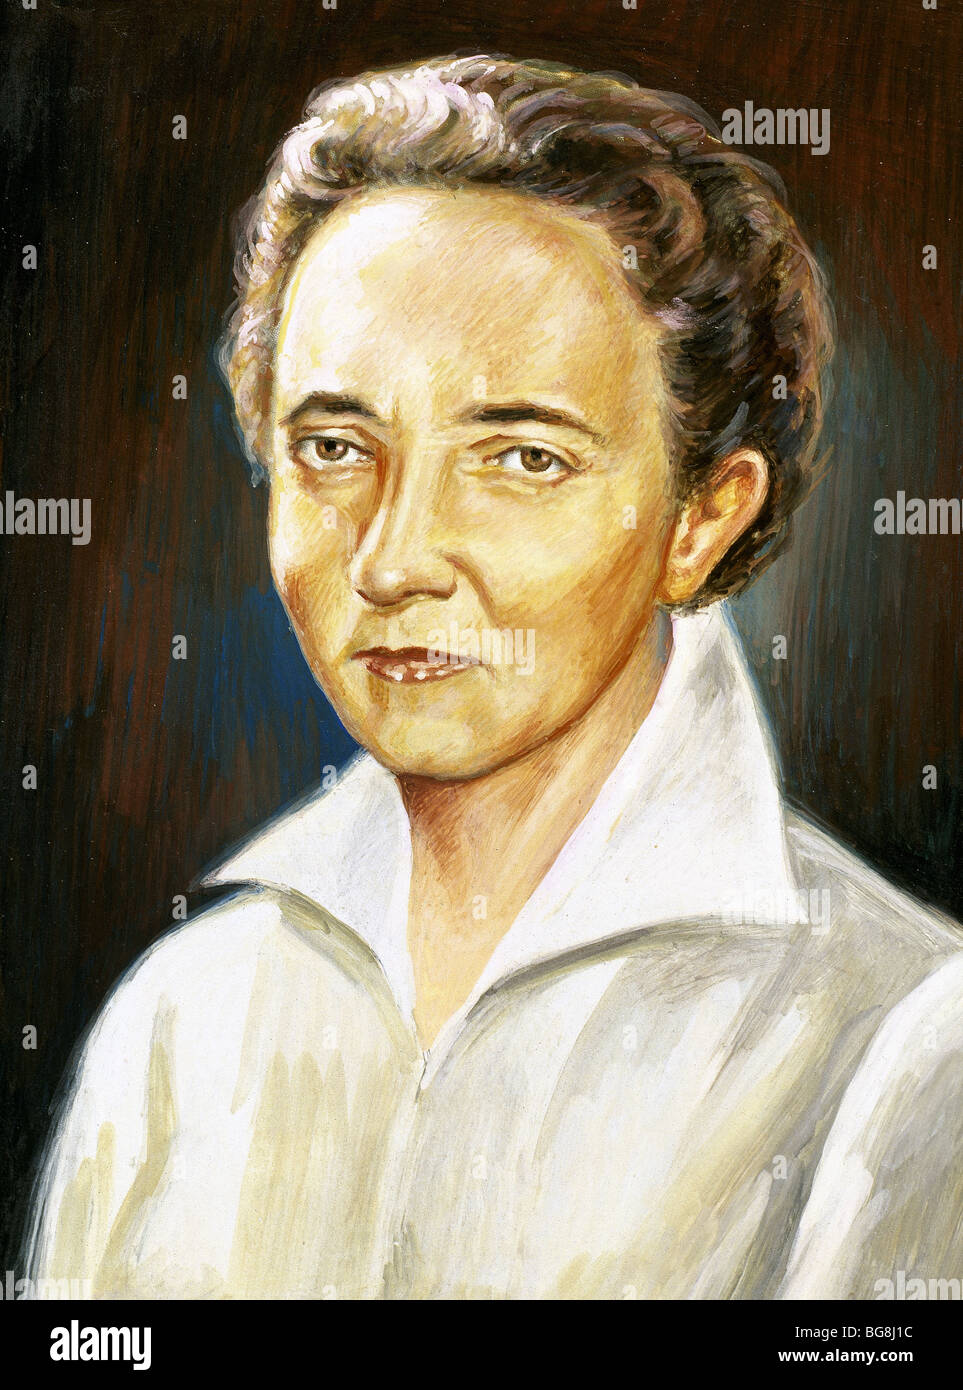 Curie, Irene (Paris, 1897-1956). French physicist. Stock Photo - curie-irene-paris-1897-1956-french-physicist-BG8J1C